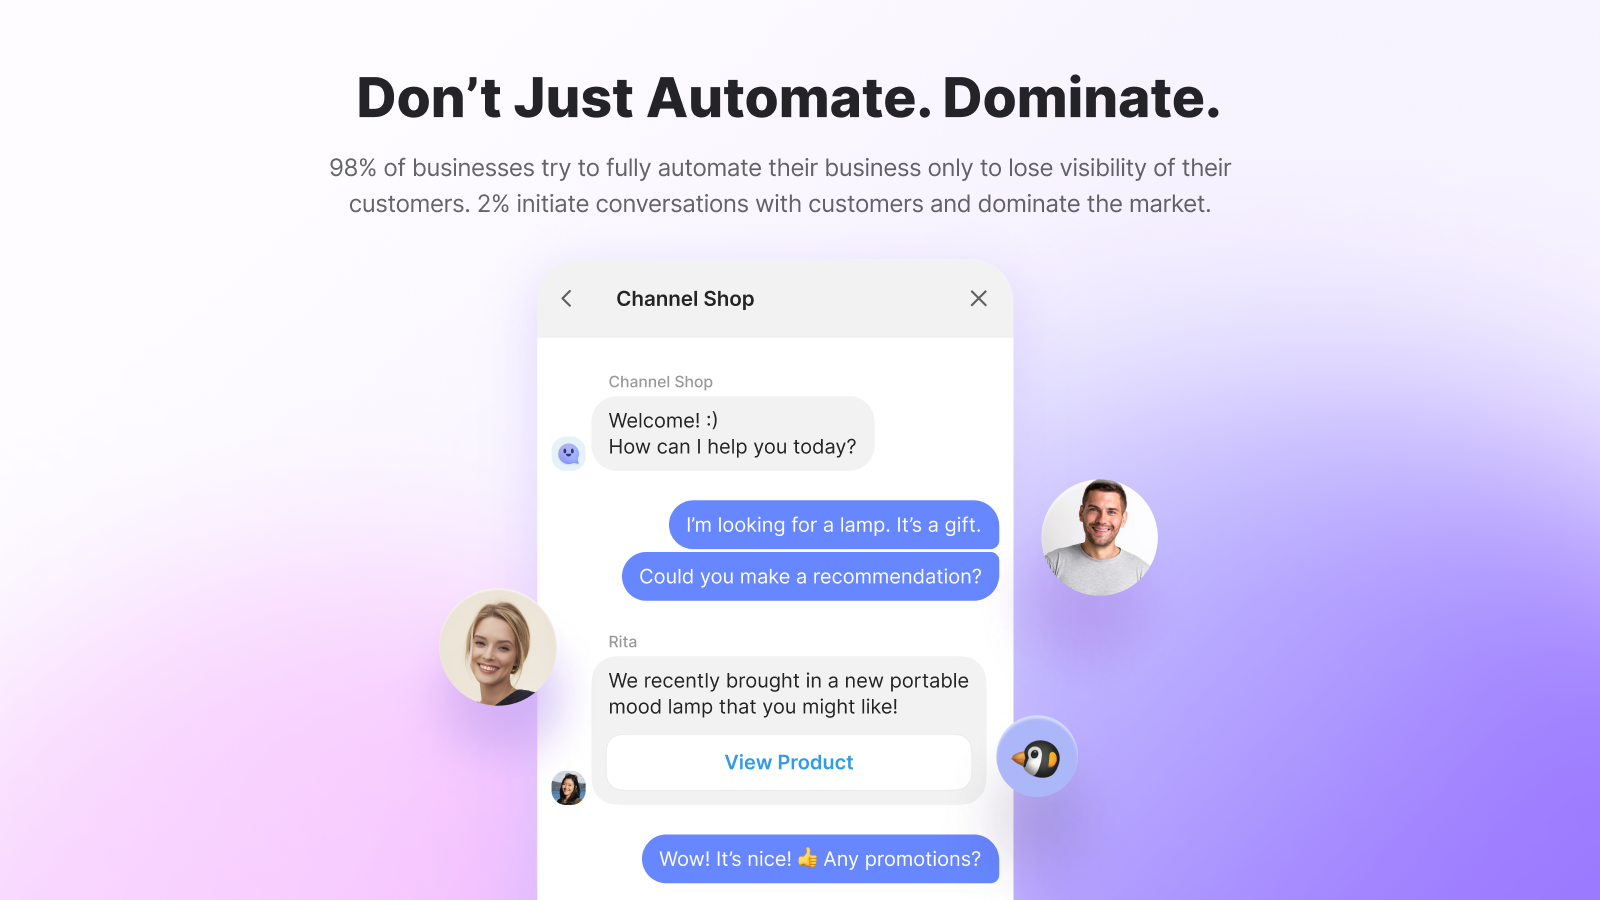 Don’t Just Automate. Dominate. - 98% of businesses try to fully automate their business only to lose visibility of their customers. 2% initiate conversations with customers and dominate the market.